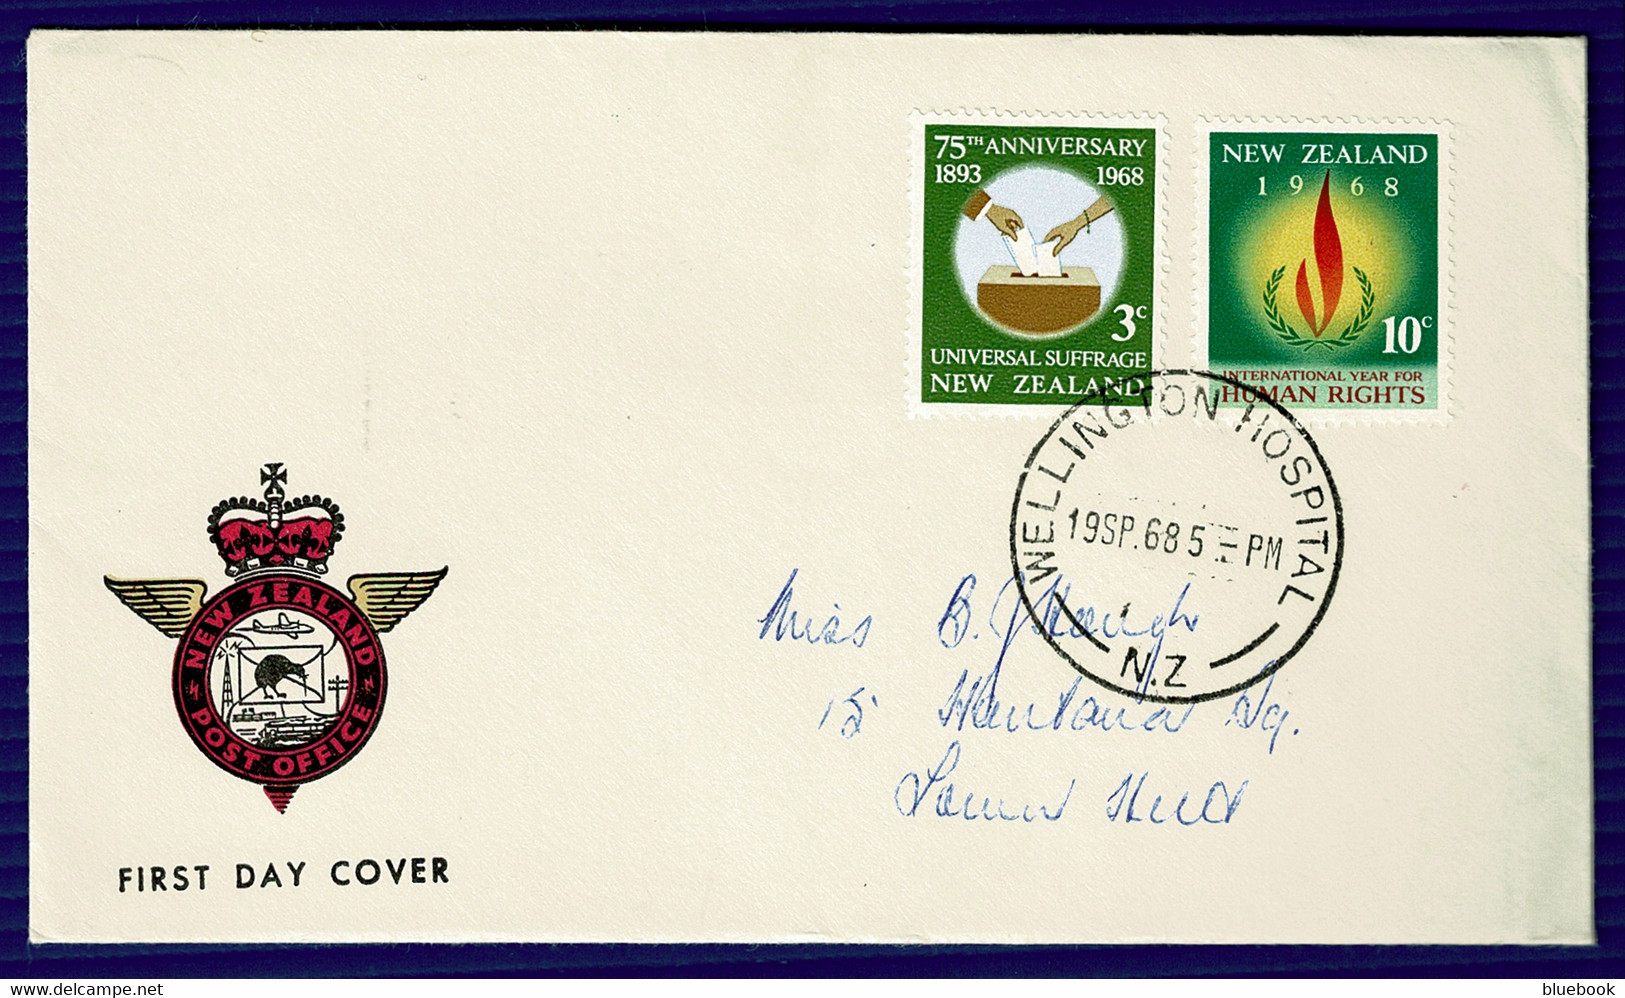 Ref 1581 - New Zealand 1968 FDC First Day Cover - Wellington Hospital Postmark - Covers & Documents